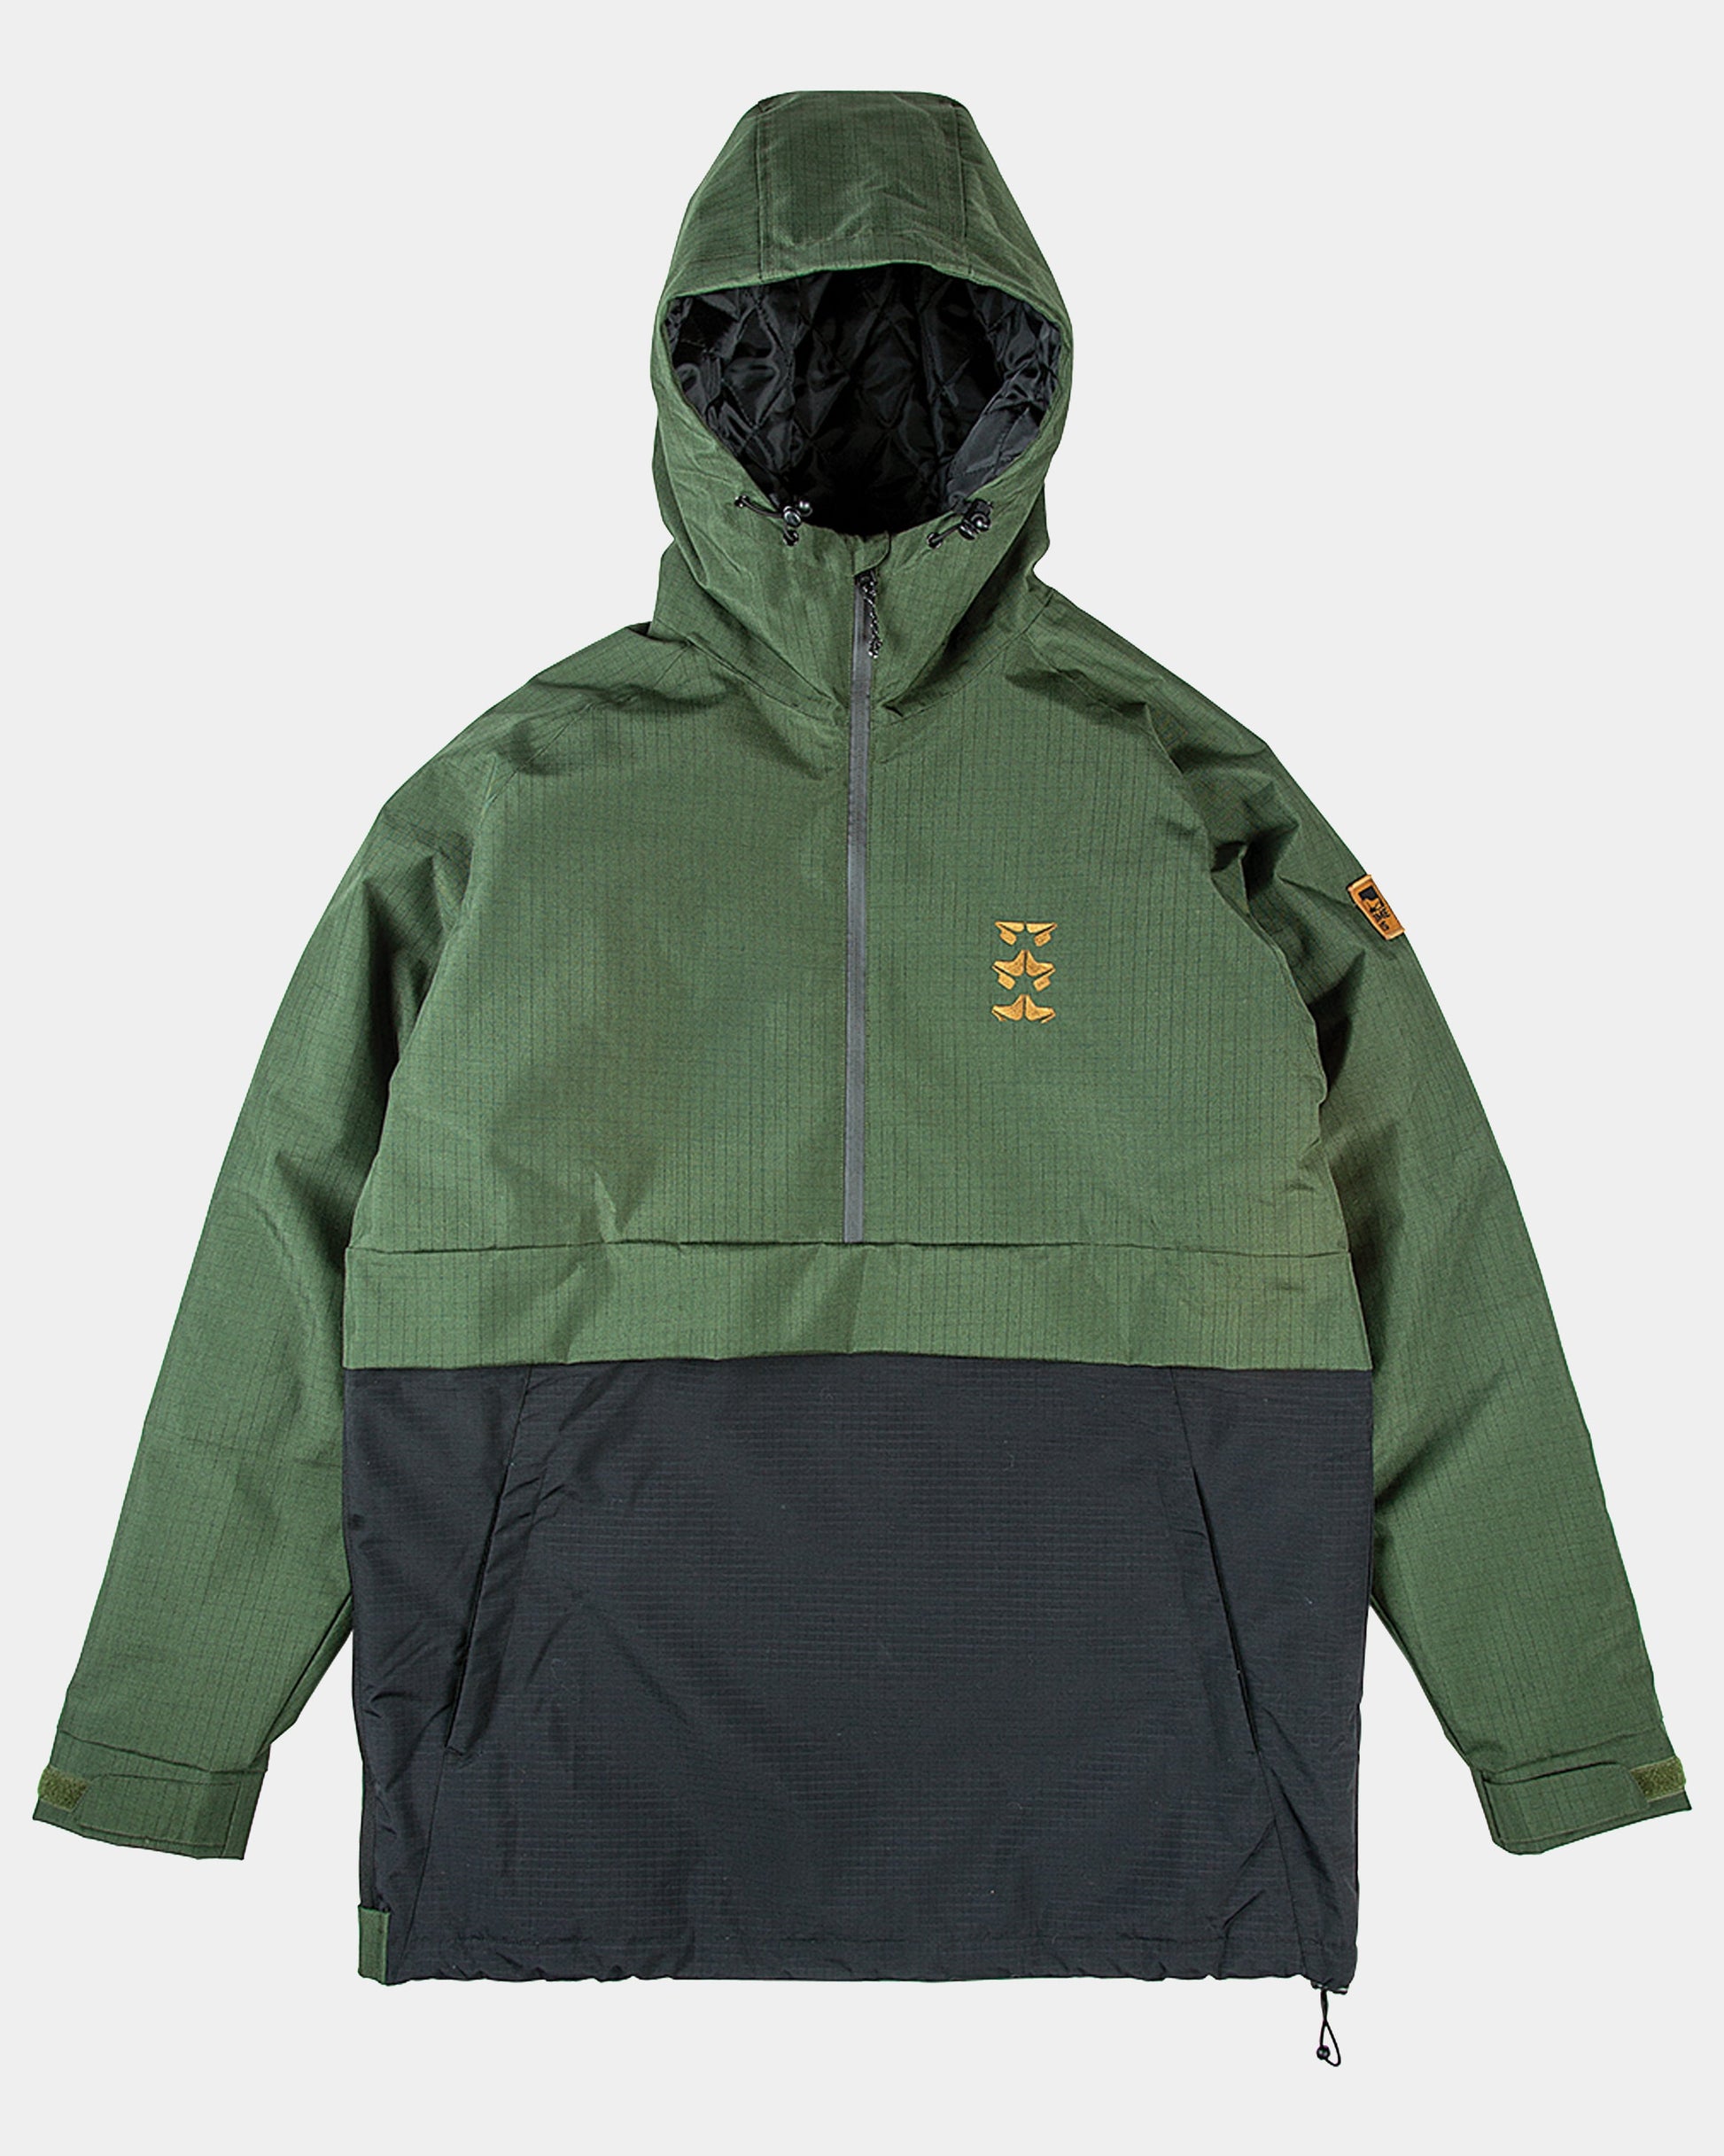 Rome Field Anorak 2022-2023 product photo from the front cover shot in the studio